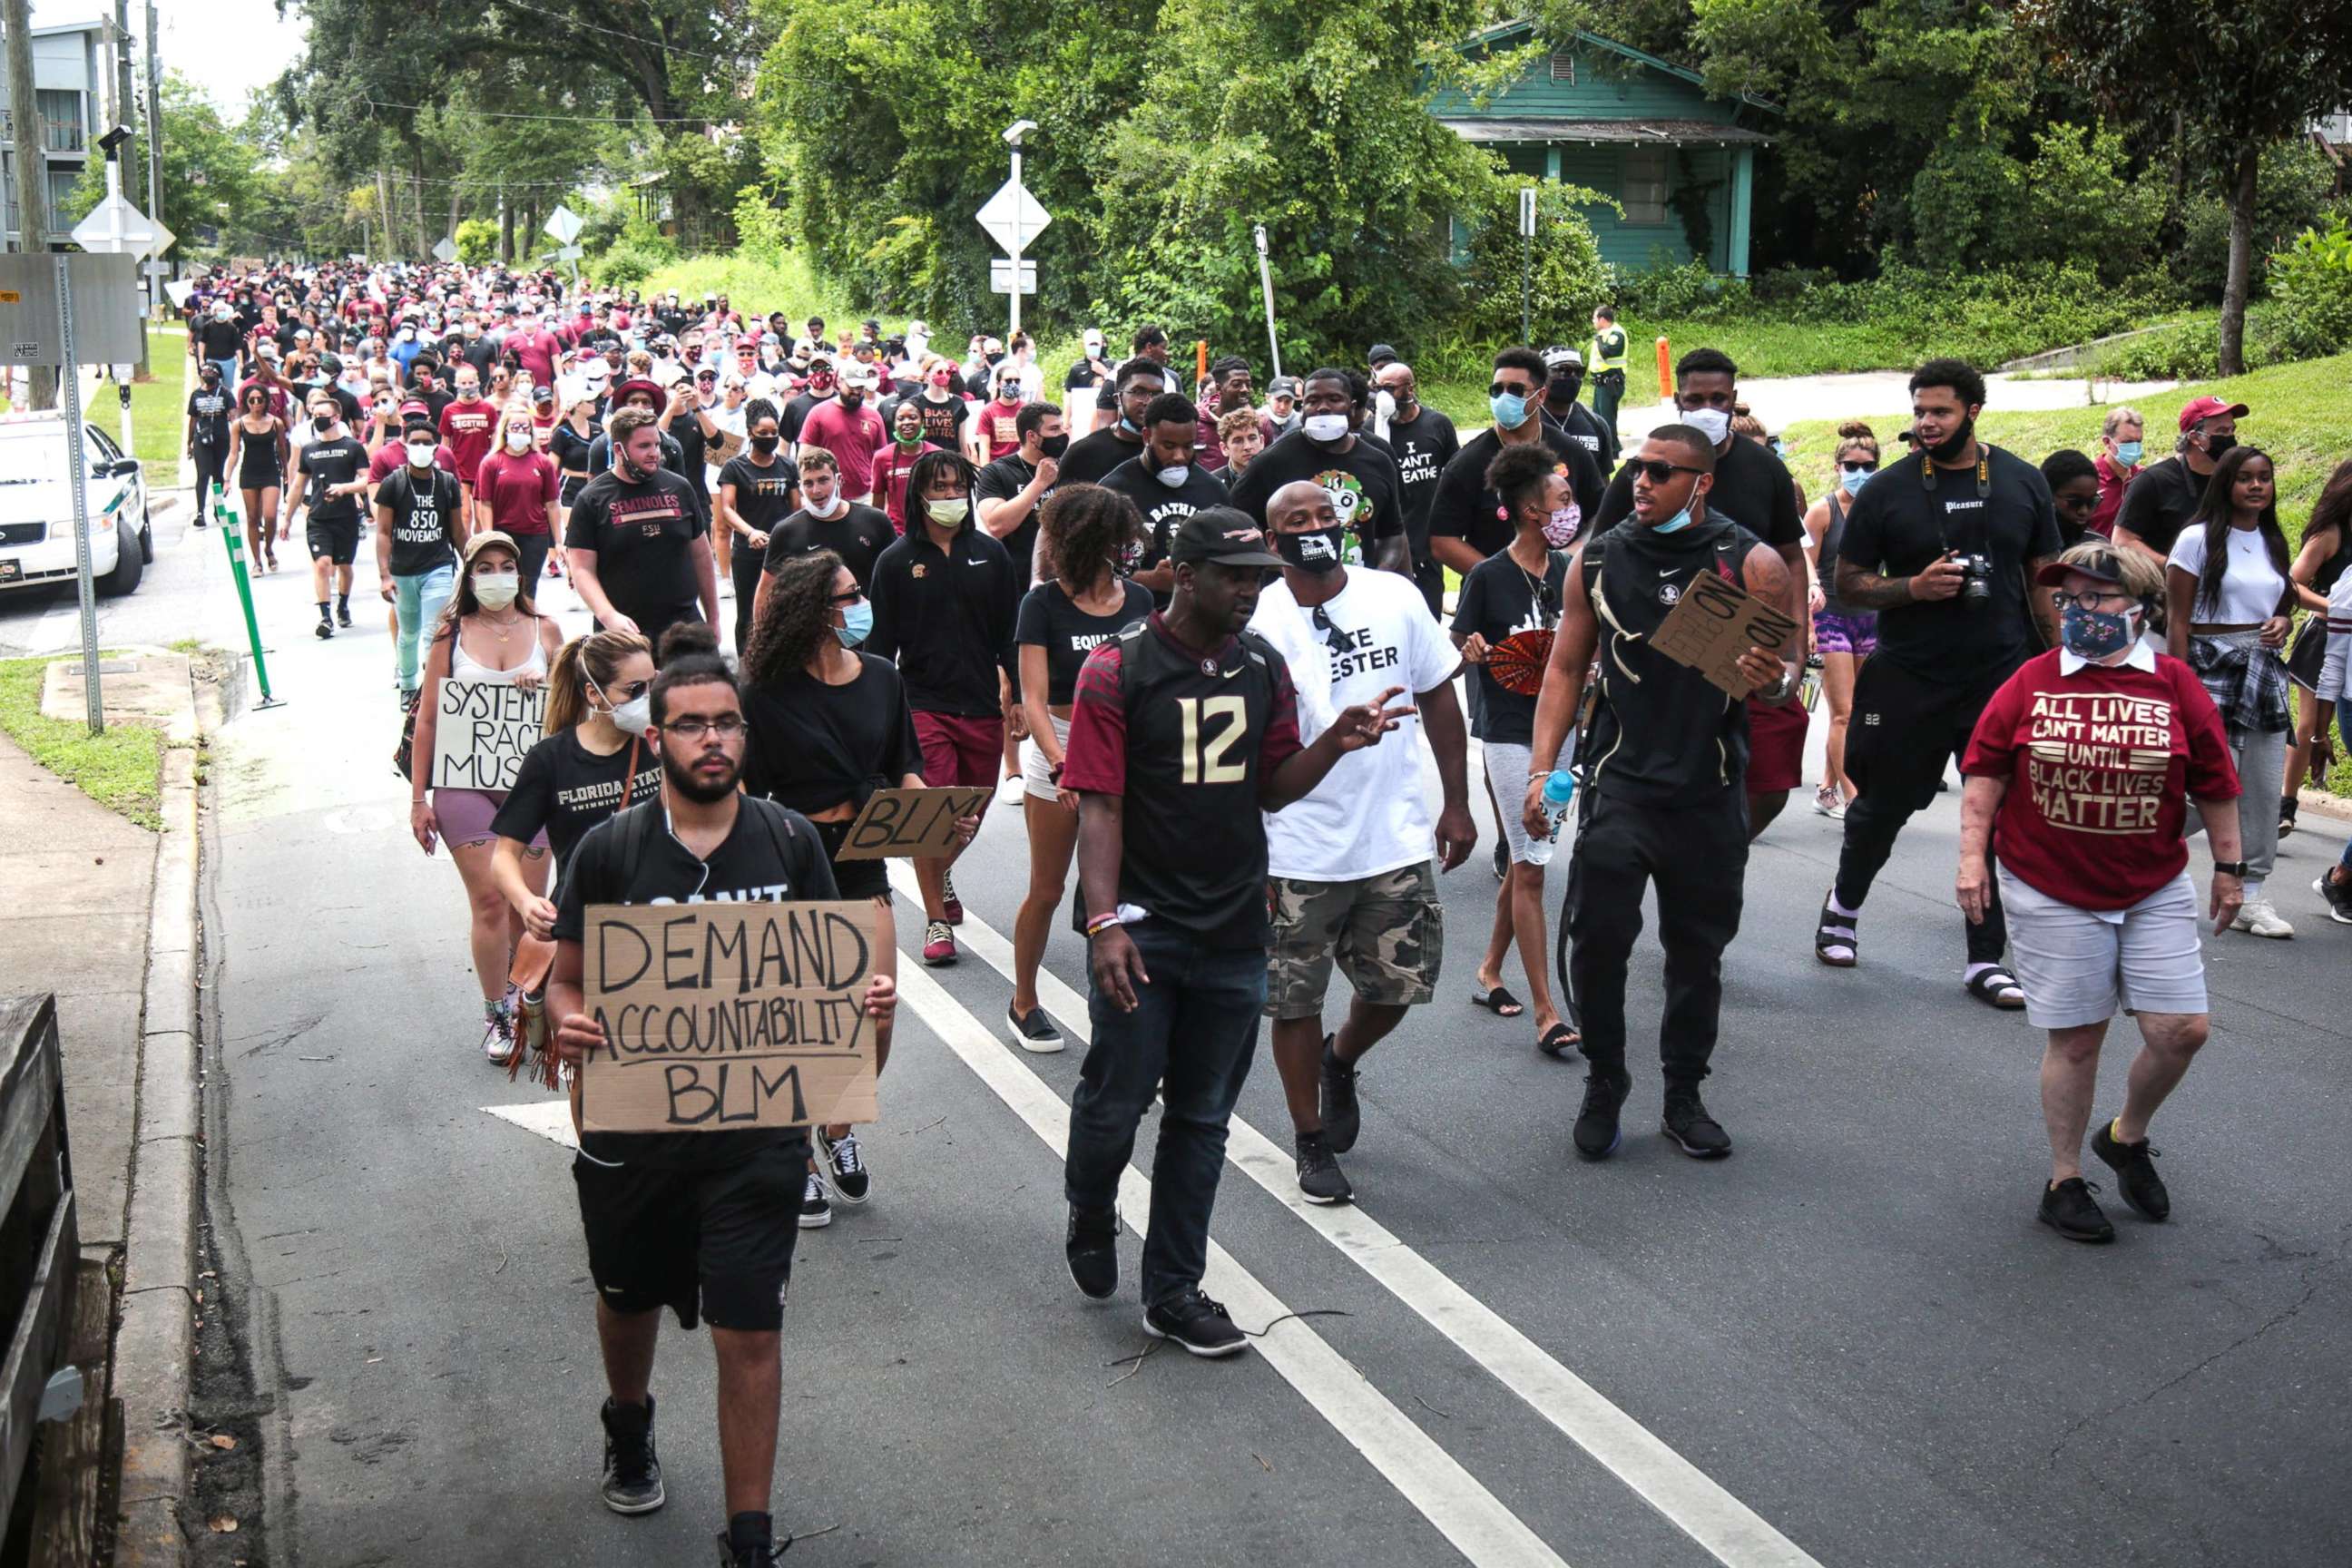 PHOTO: FSU students and community members marched to protest police brutality, June 14, 2020, in Tallahassee, Fla.